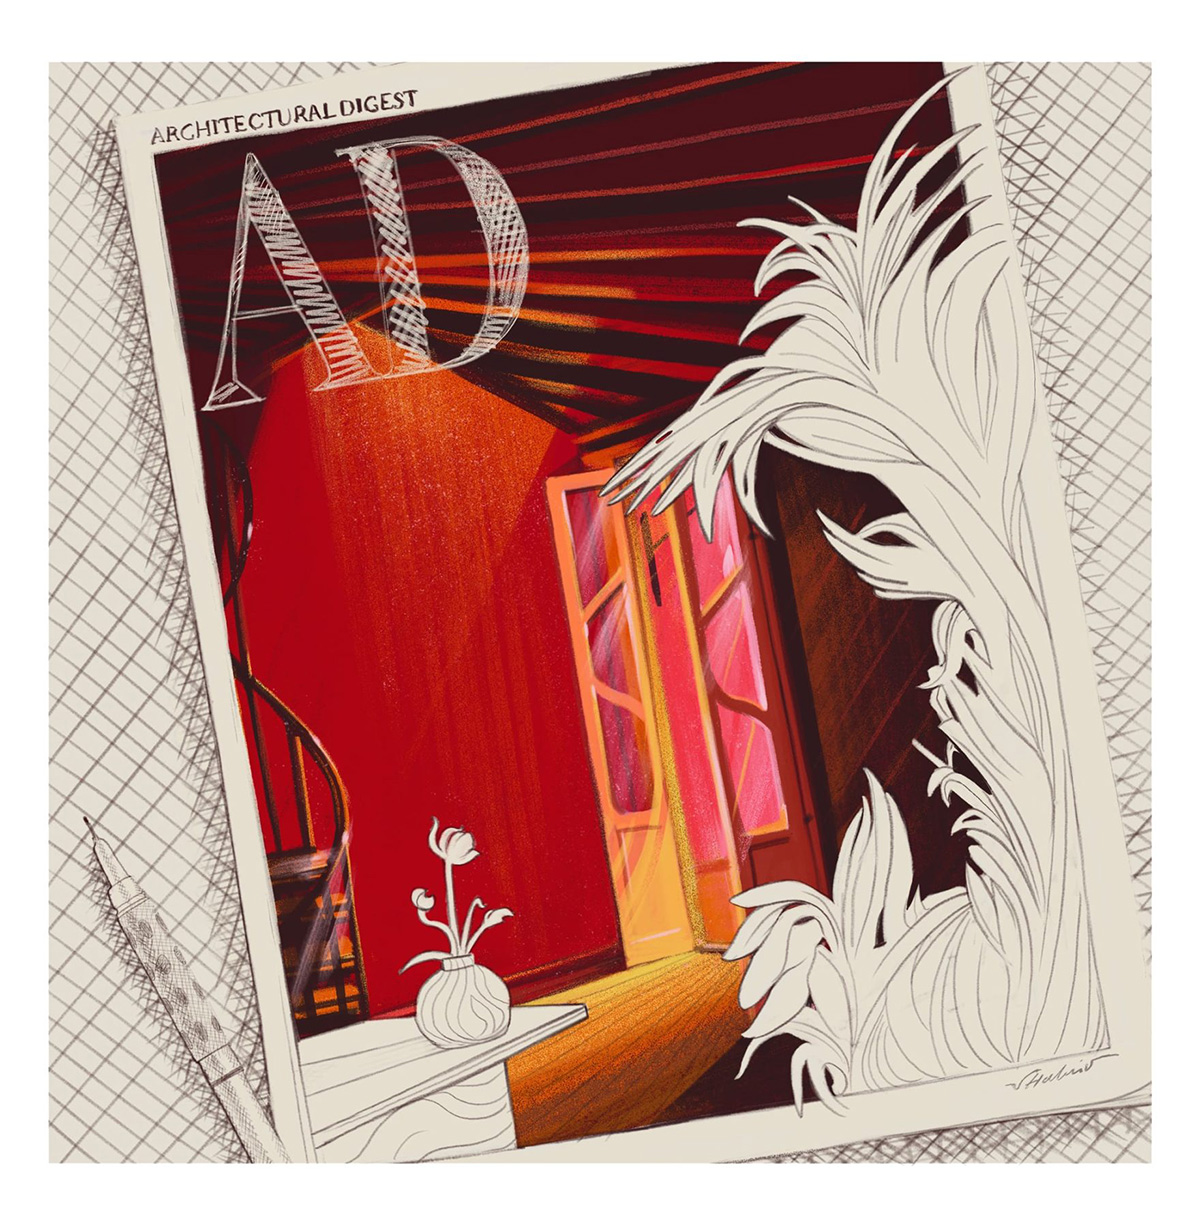 ARCHITECTURAL DIGEST COVER